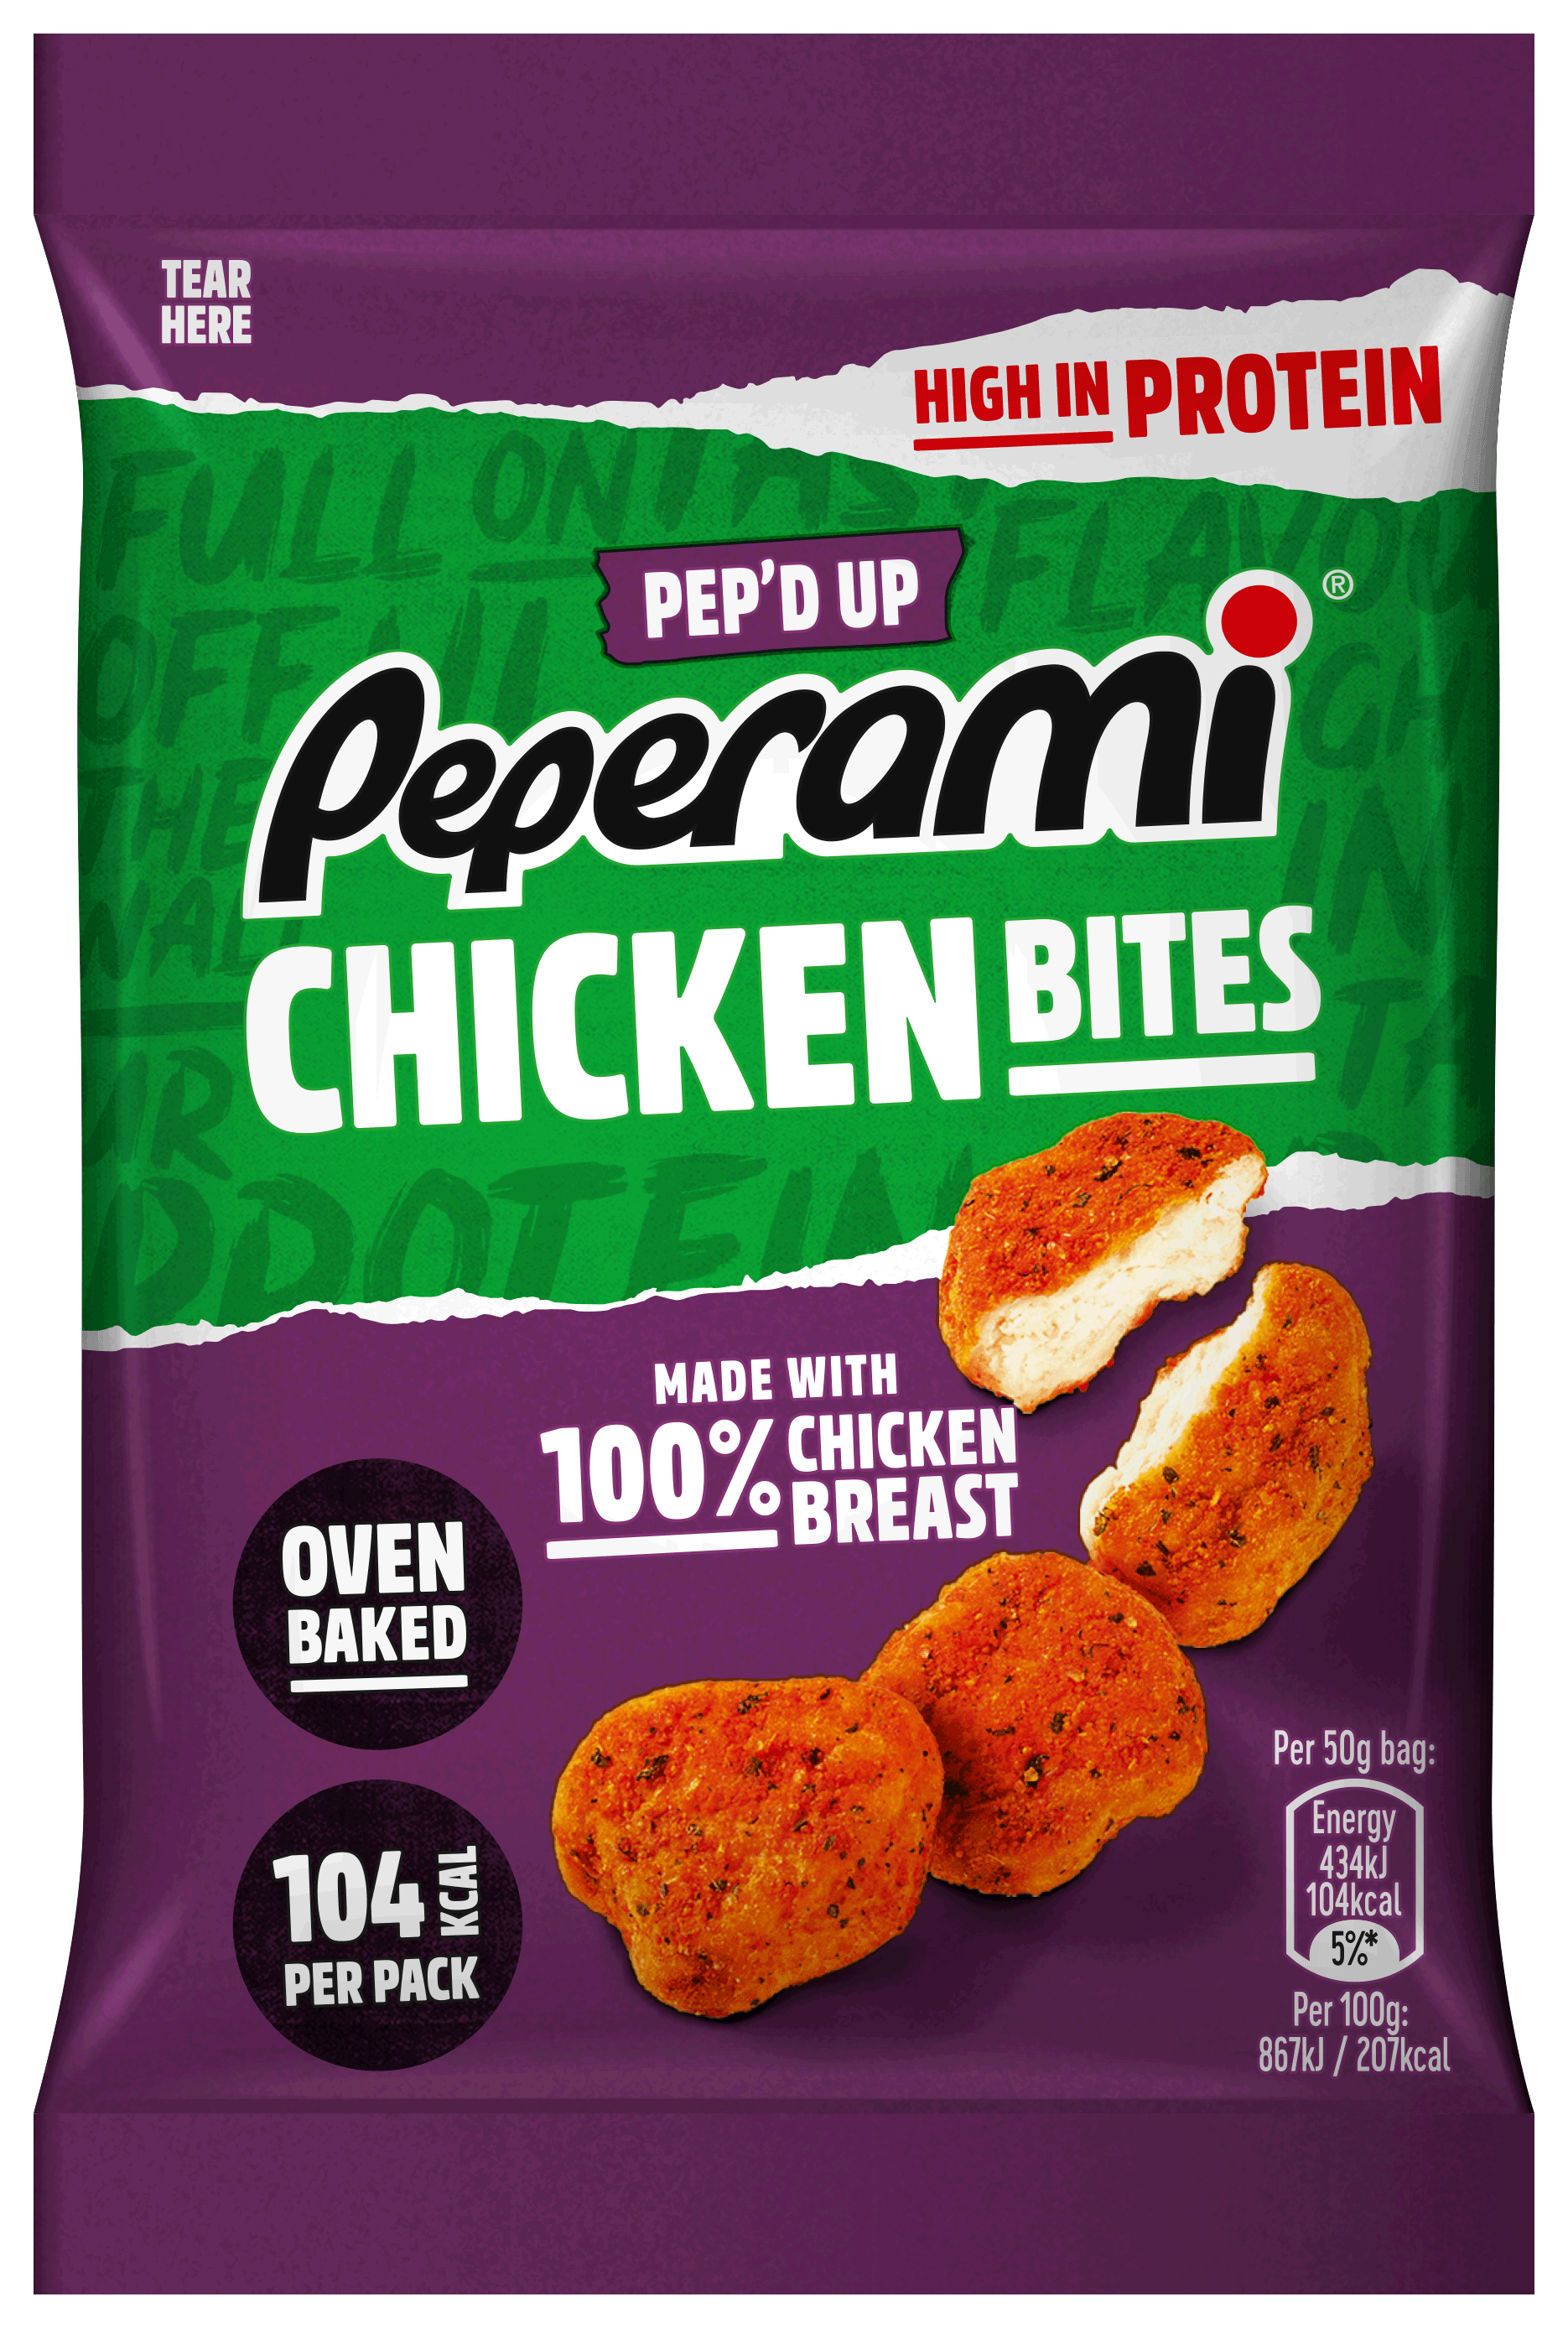 Peperami Chicken Bites are just 75p per 50g packet at Sainsbury’s until February 13